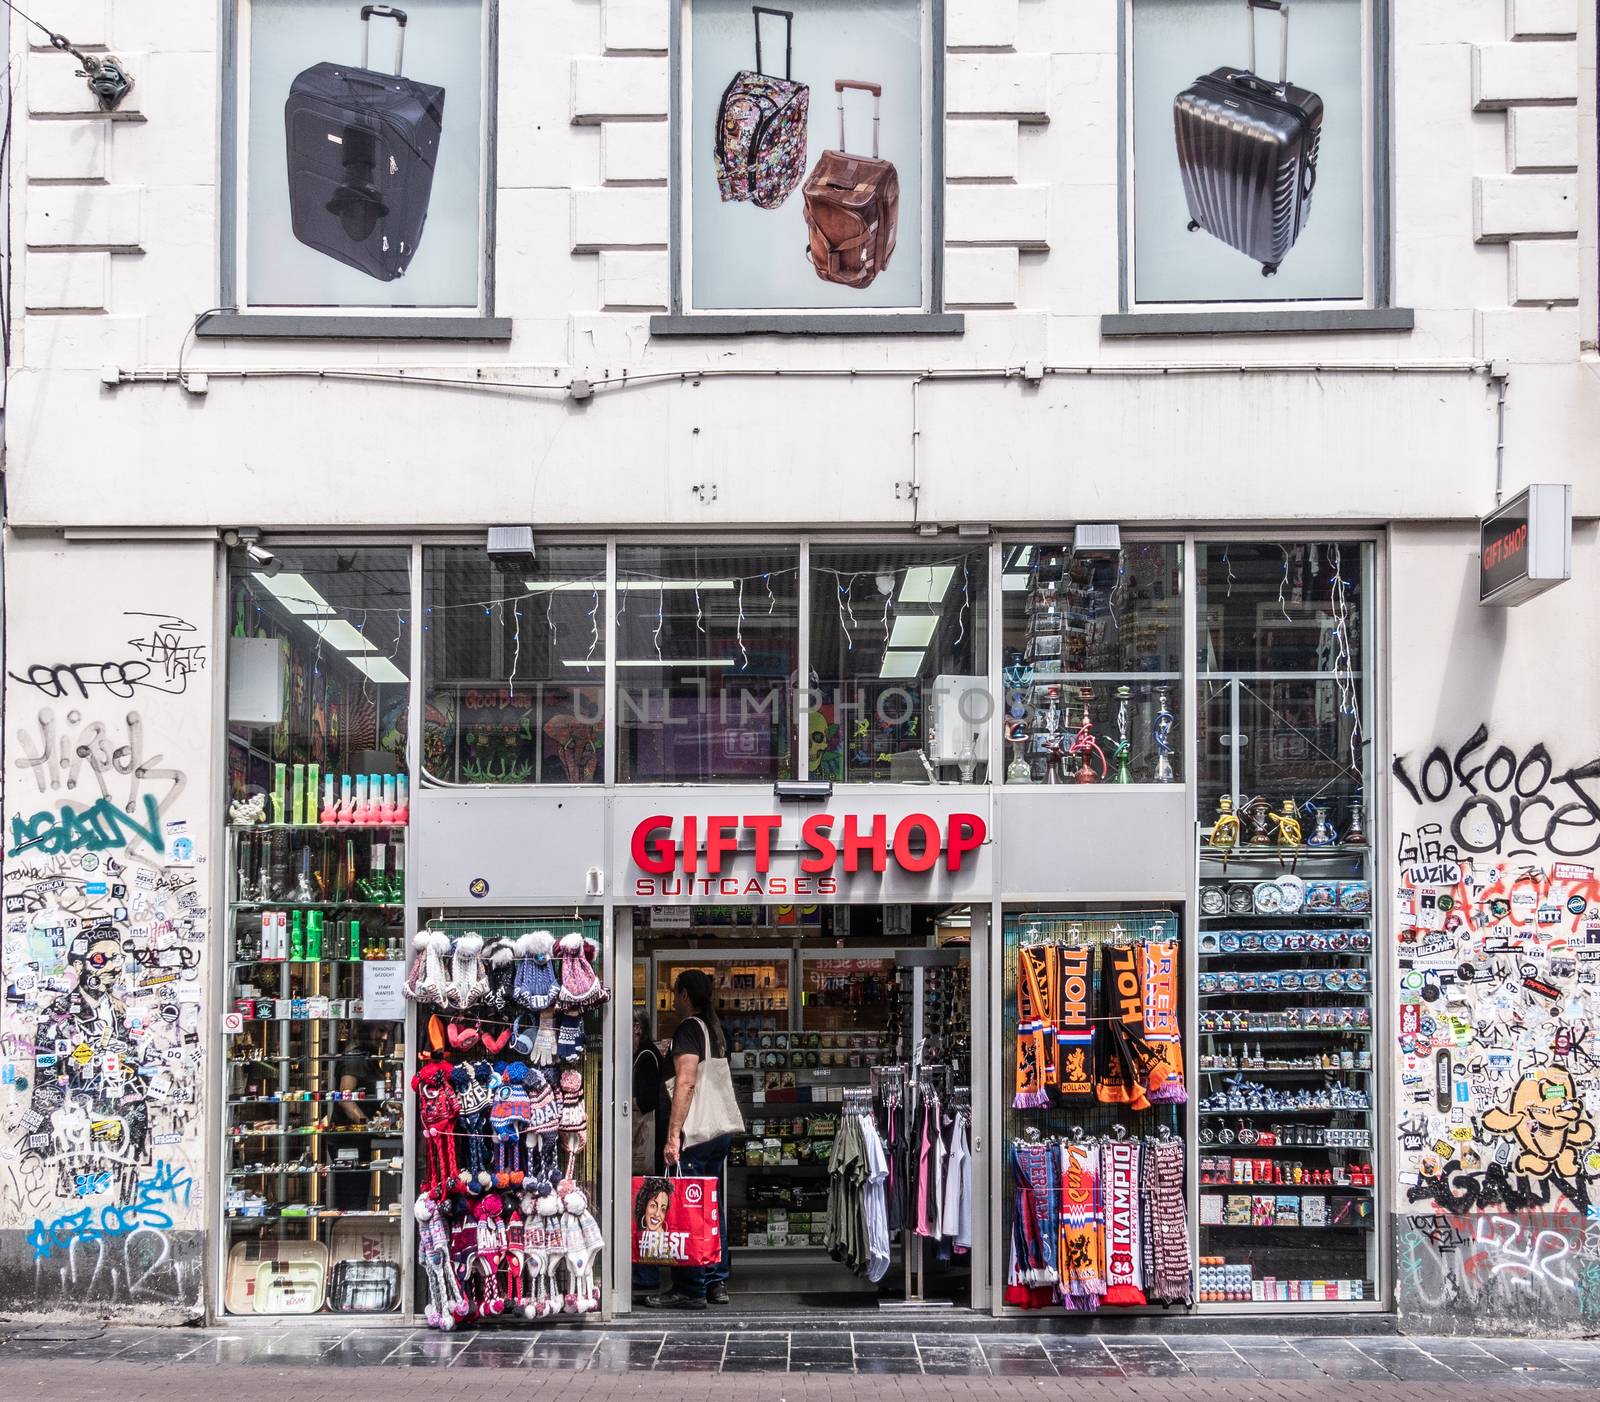 Amsterdam, the Netherlands - July 1, 2019: Gift shop entrance and facade with items on display set in white wall, covered in graffiti and stickers.